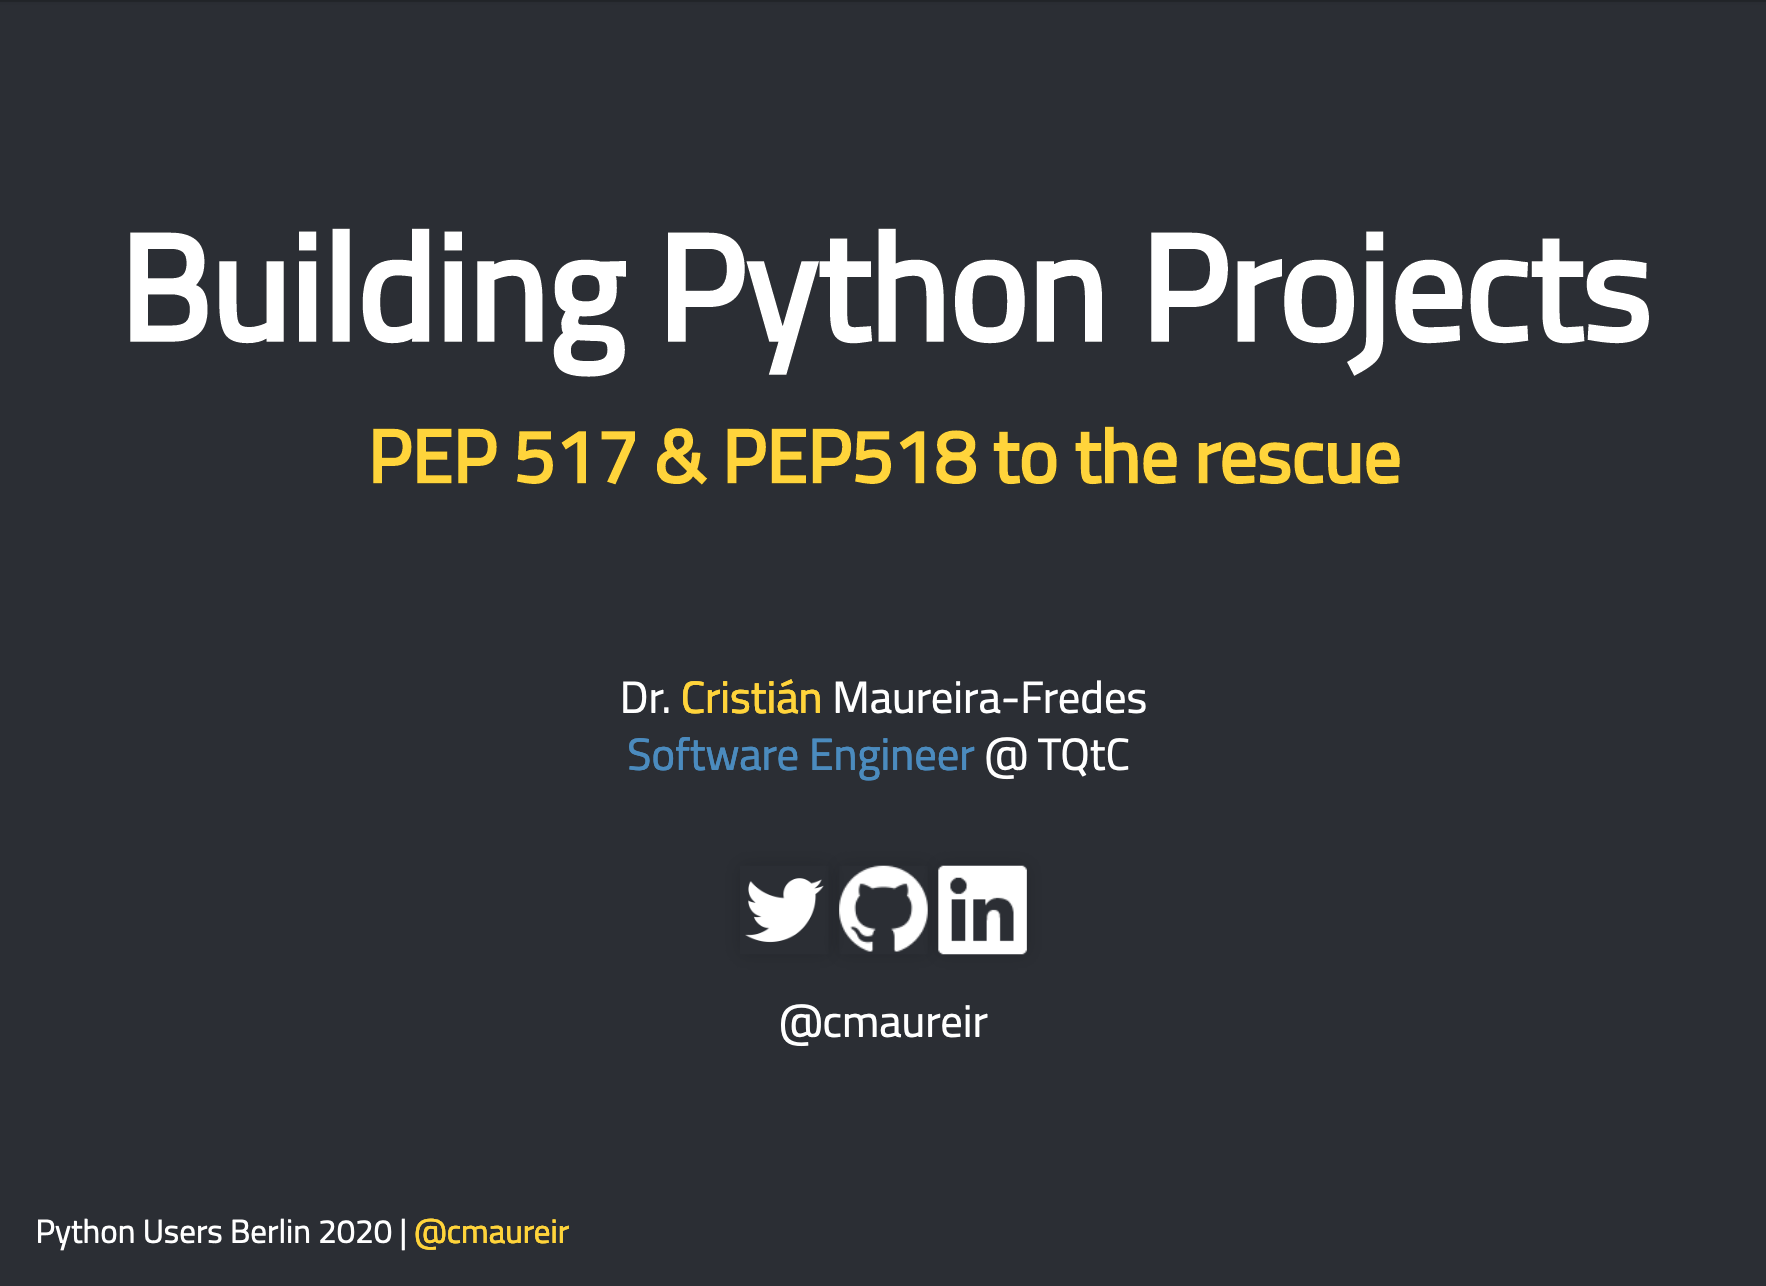 «Building Python Projects – PEP 517 & PEP518 to the rescue» by Dr. Cristián Maureira-Fredes